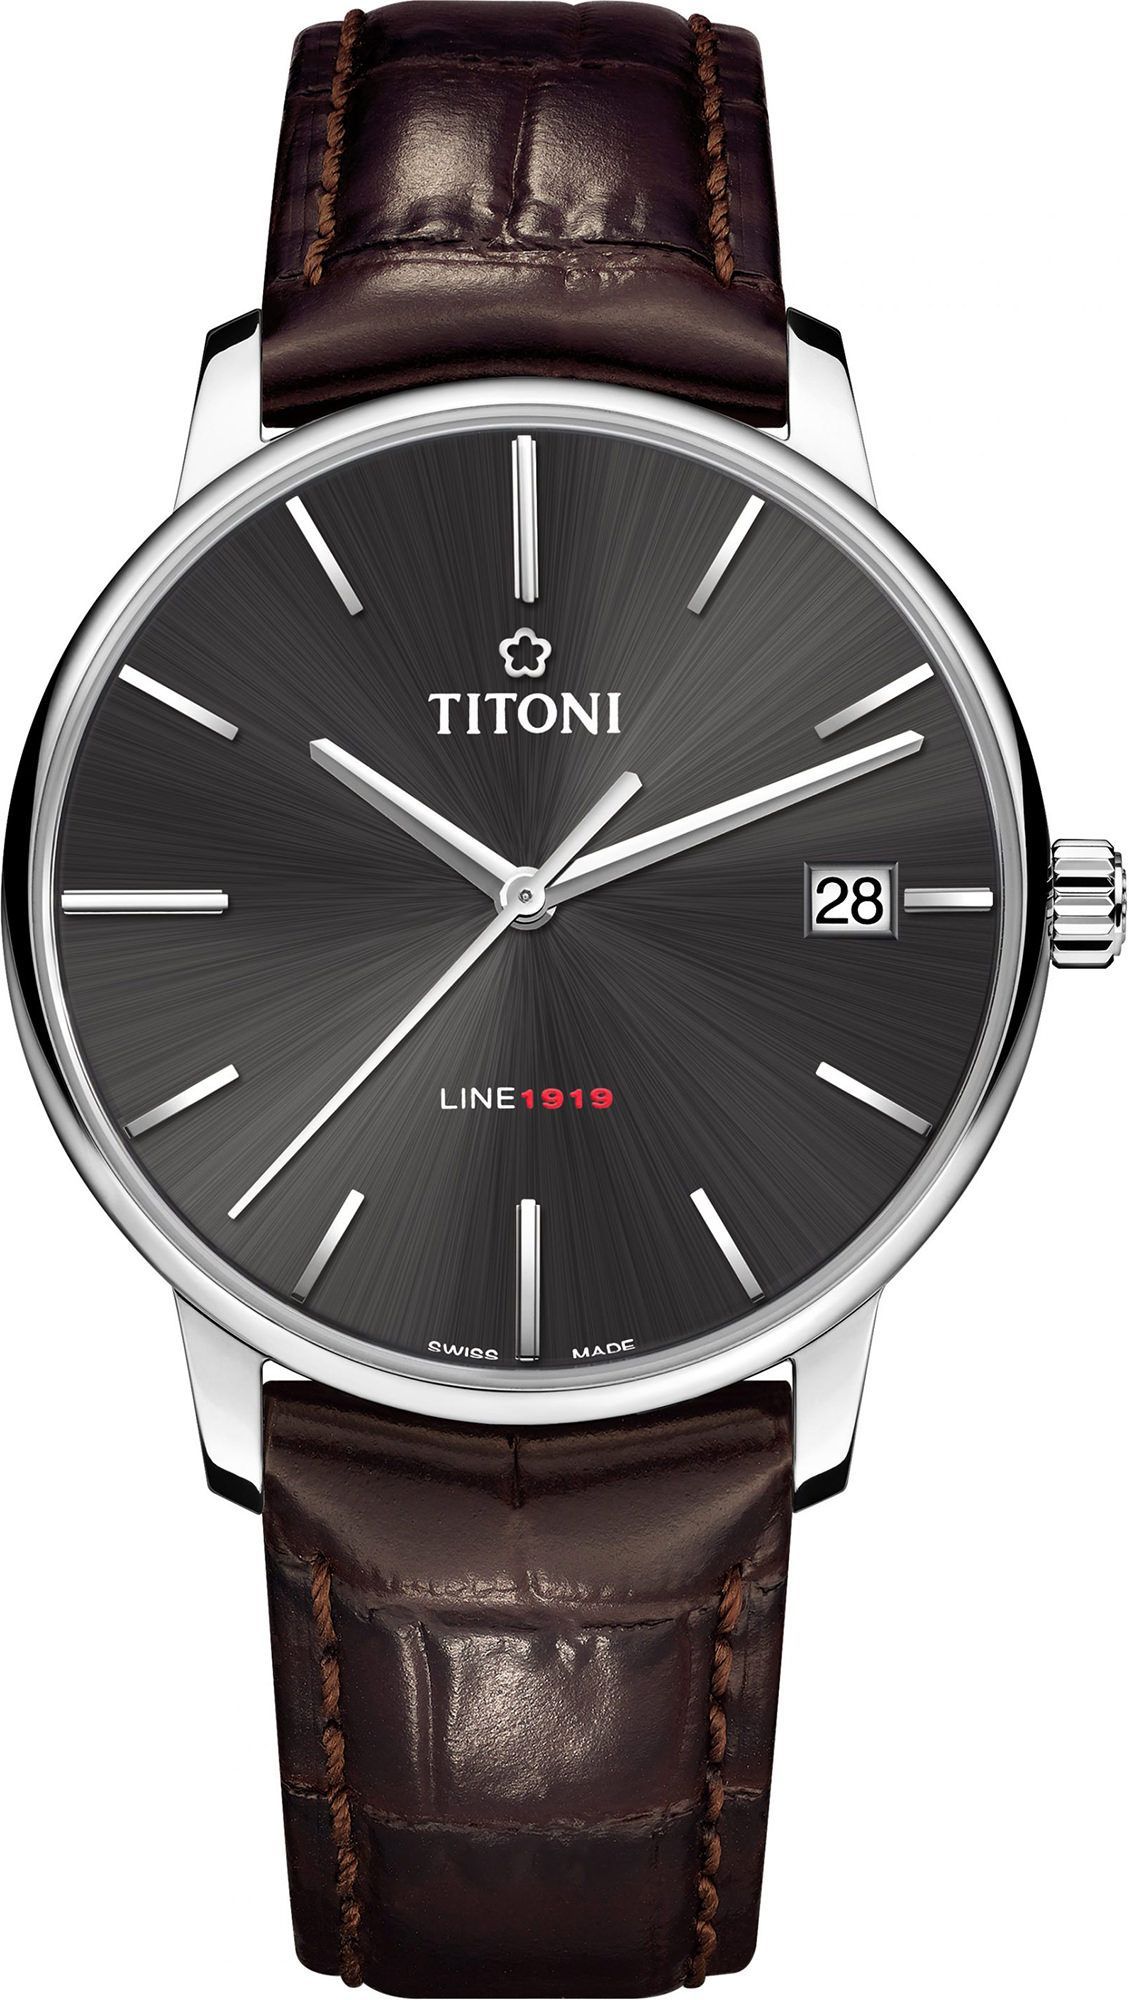 Titoni Line 1919  Anthracite Dial 40 mm Automatic Watch For Men - 1